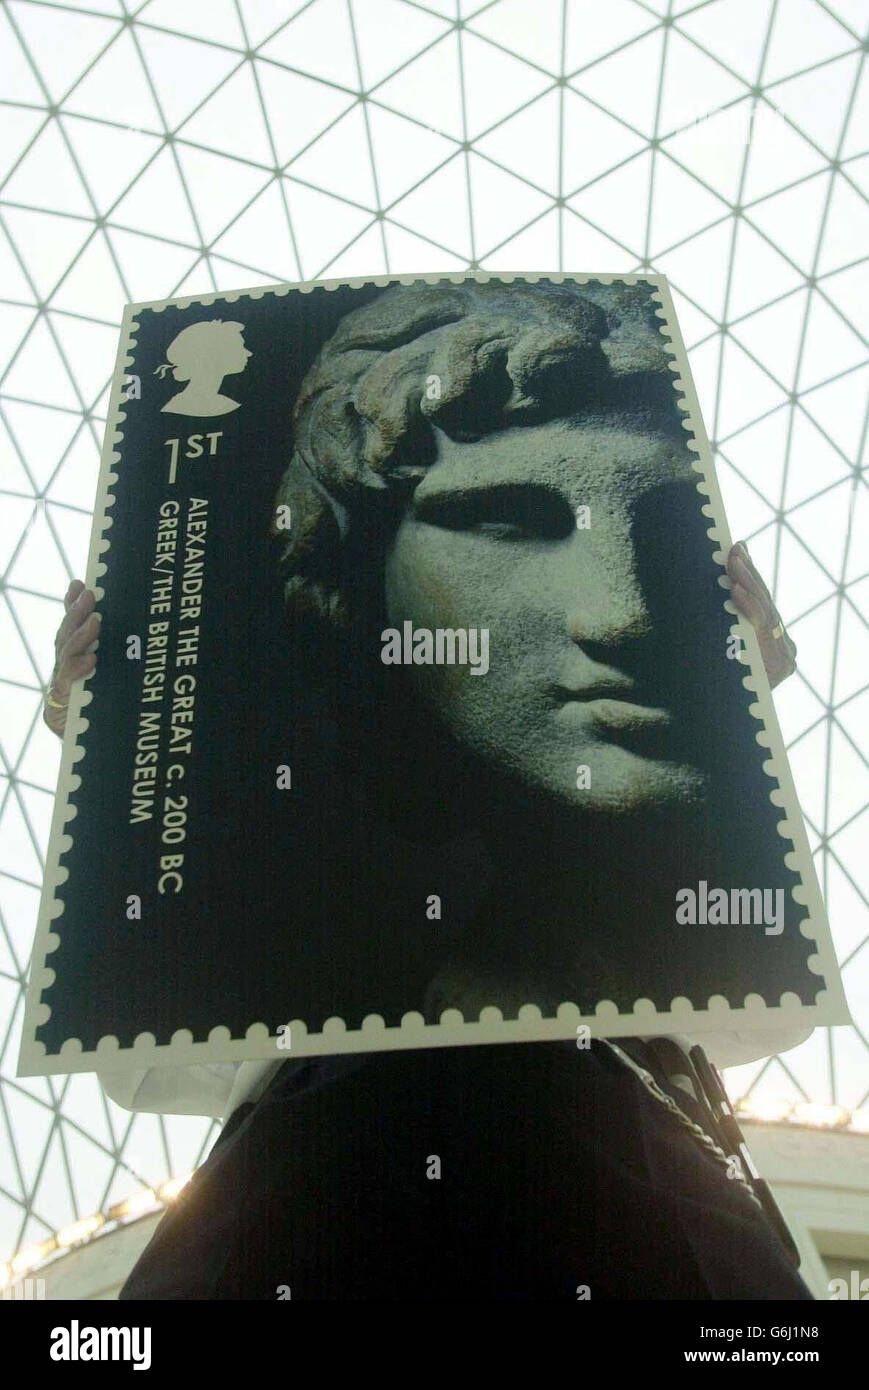 A member of staff at the British Museum in central London displaying the new first-class stamp image of Alexander The Great taken from the museum's collection of rare art and antiquities outside the museum. The Royal Mail is celebrating the 250th anniversary of the British Museum by releasing six new stamps featuring historical images, it announced. The British Museum stamp collection showcase six artefacts from five continents all from the museum itelf. The stamps will be available from 17,500 post offices from October 7. Stock Photo